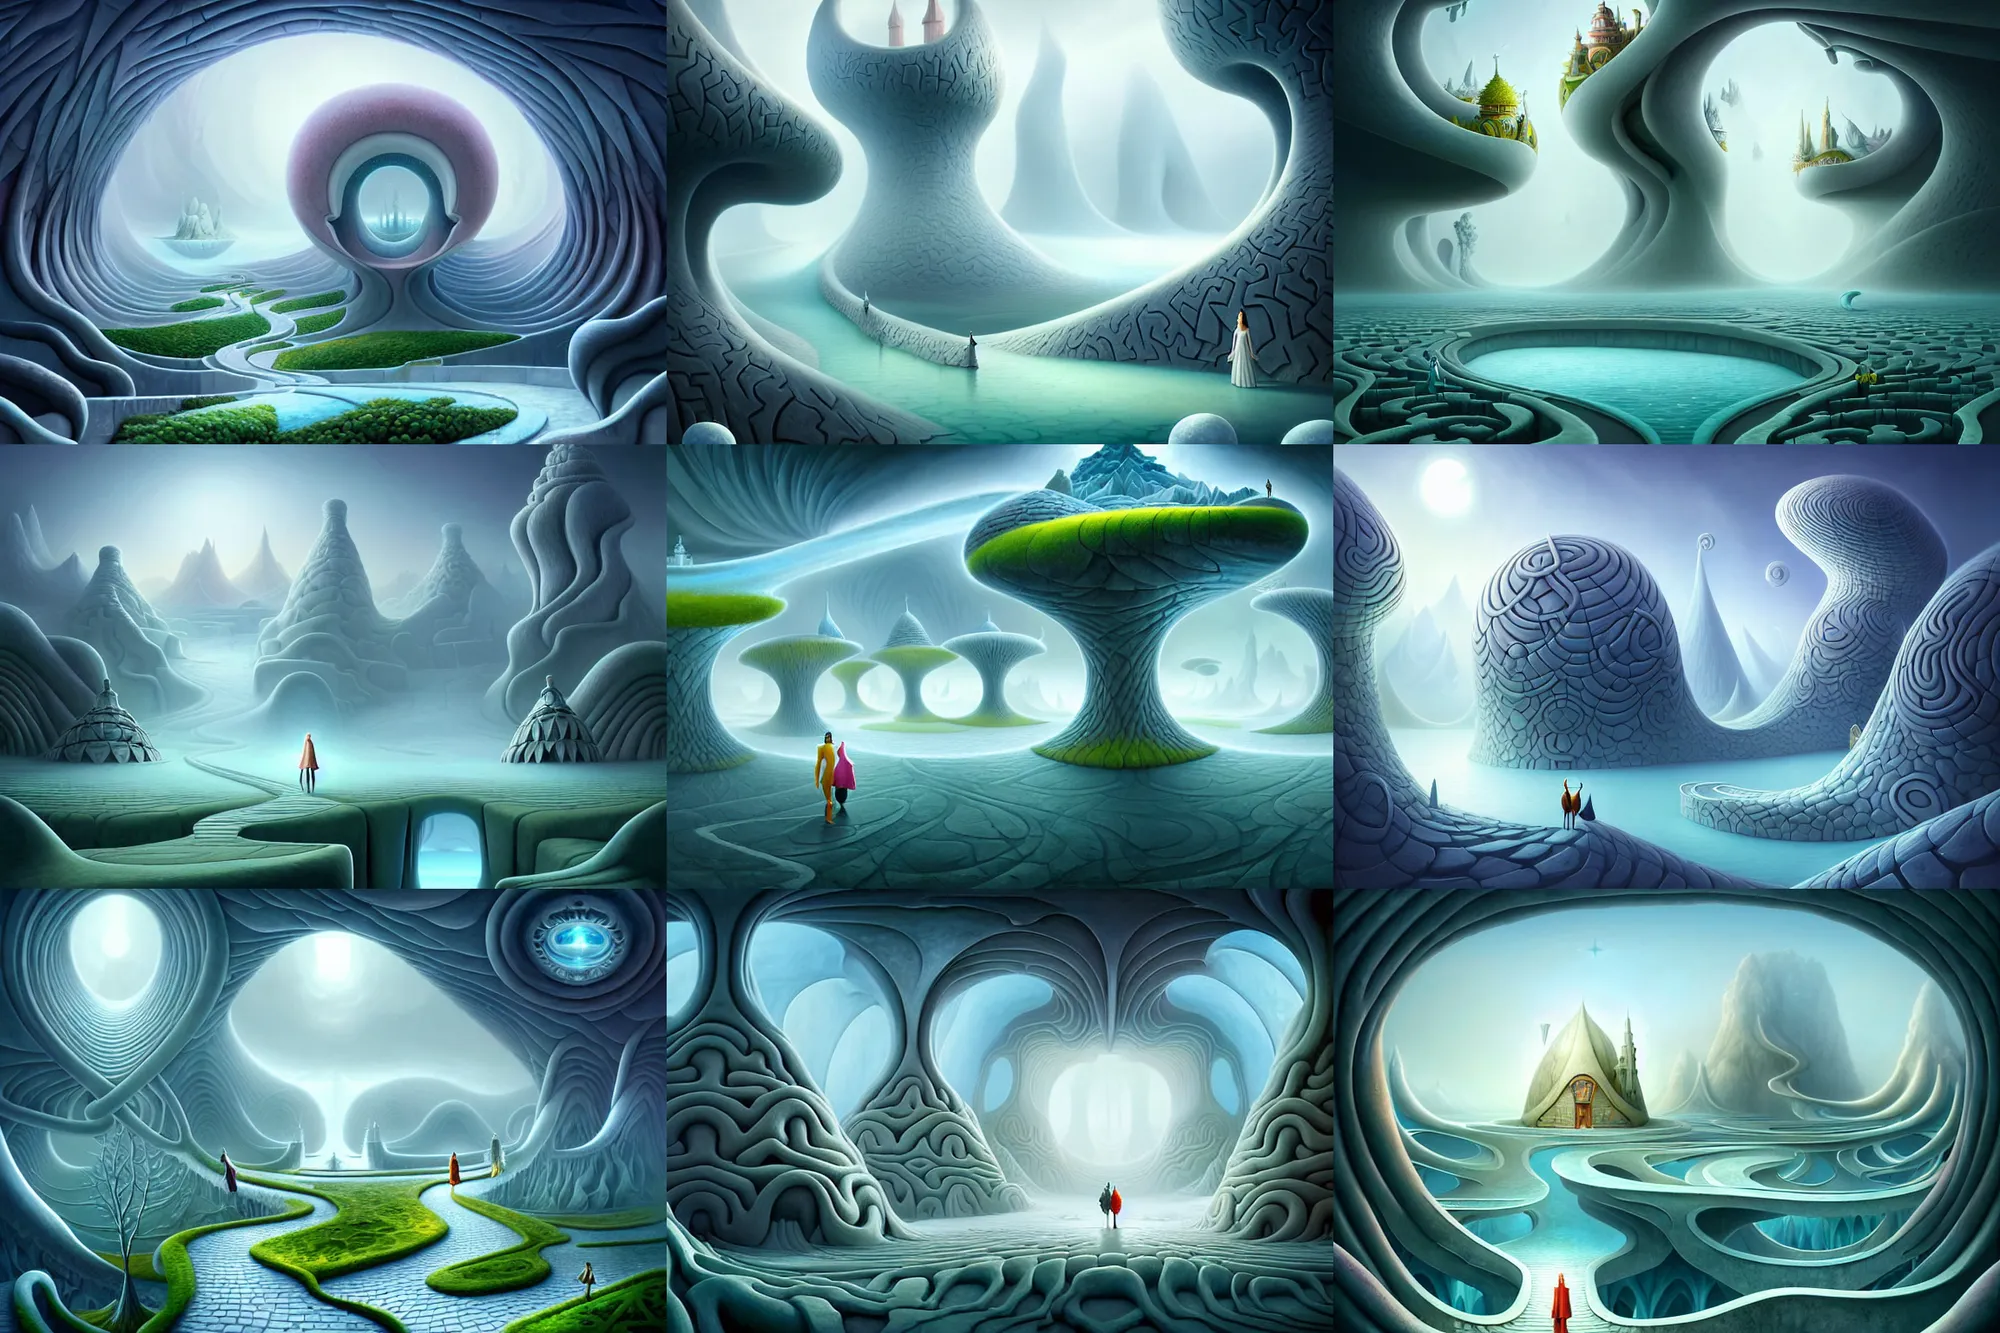 Prompt: a matte painting of an impossible path winding through arctic dream worlds with surreal architecture designed by heironymous bosch, structures inspired by heironymous bosch's garden of earthly delights, surreal ice interiors by cyril rolando and asher durand and natalie shau, insanely detailed, whimsical, intricate, mysterious